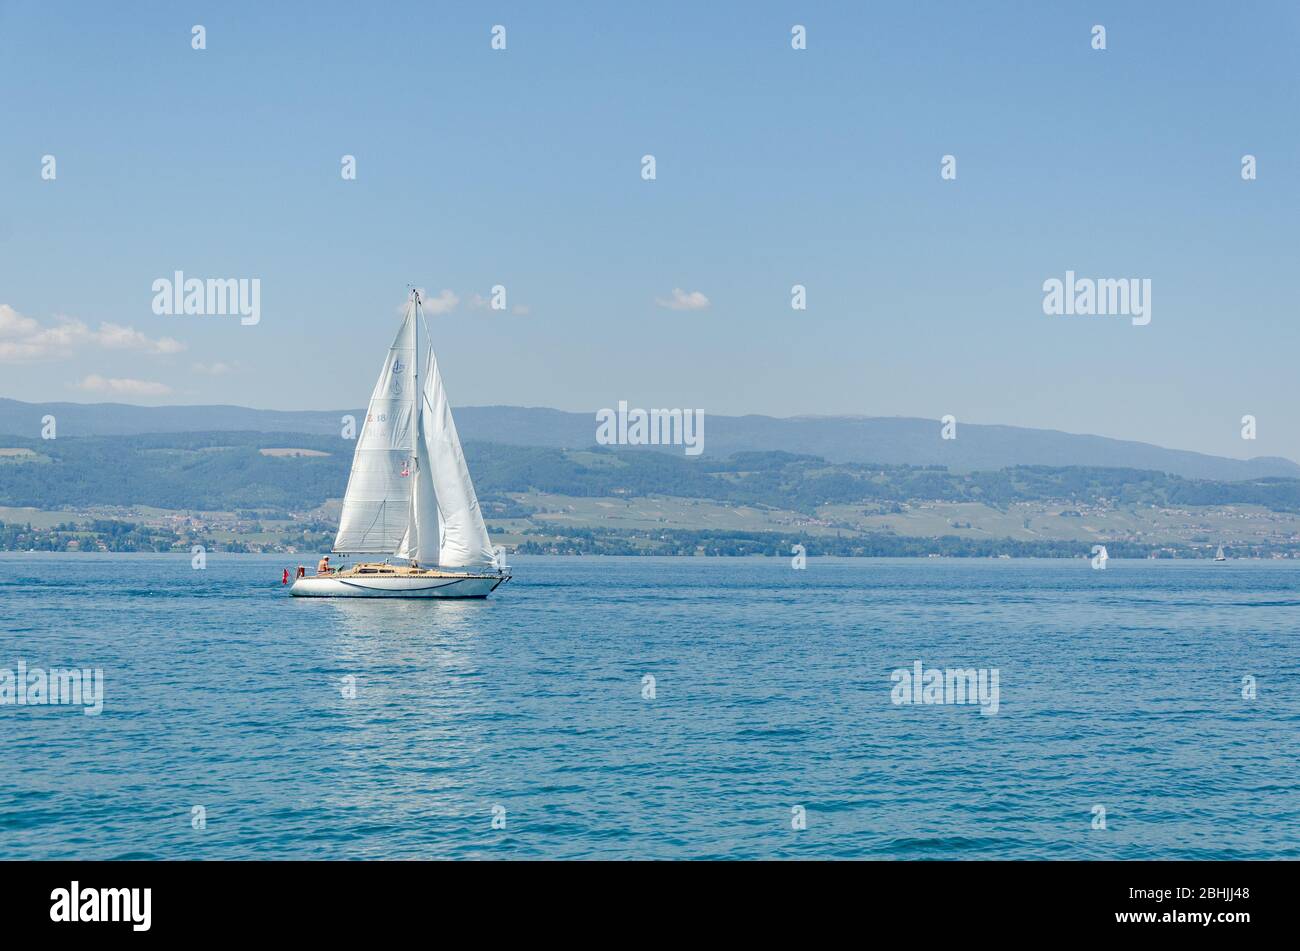 View of a small sailing yacht in Lake Geneva as seen from Port d'Yvoire, Yvoire, France Stock Photo